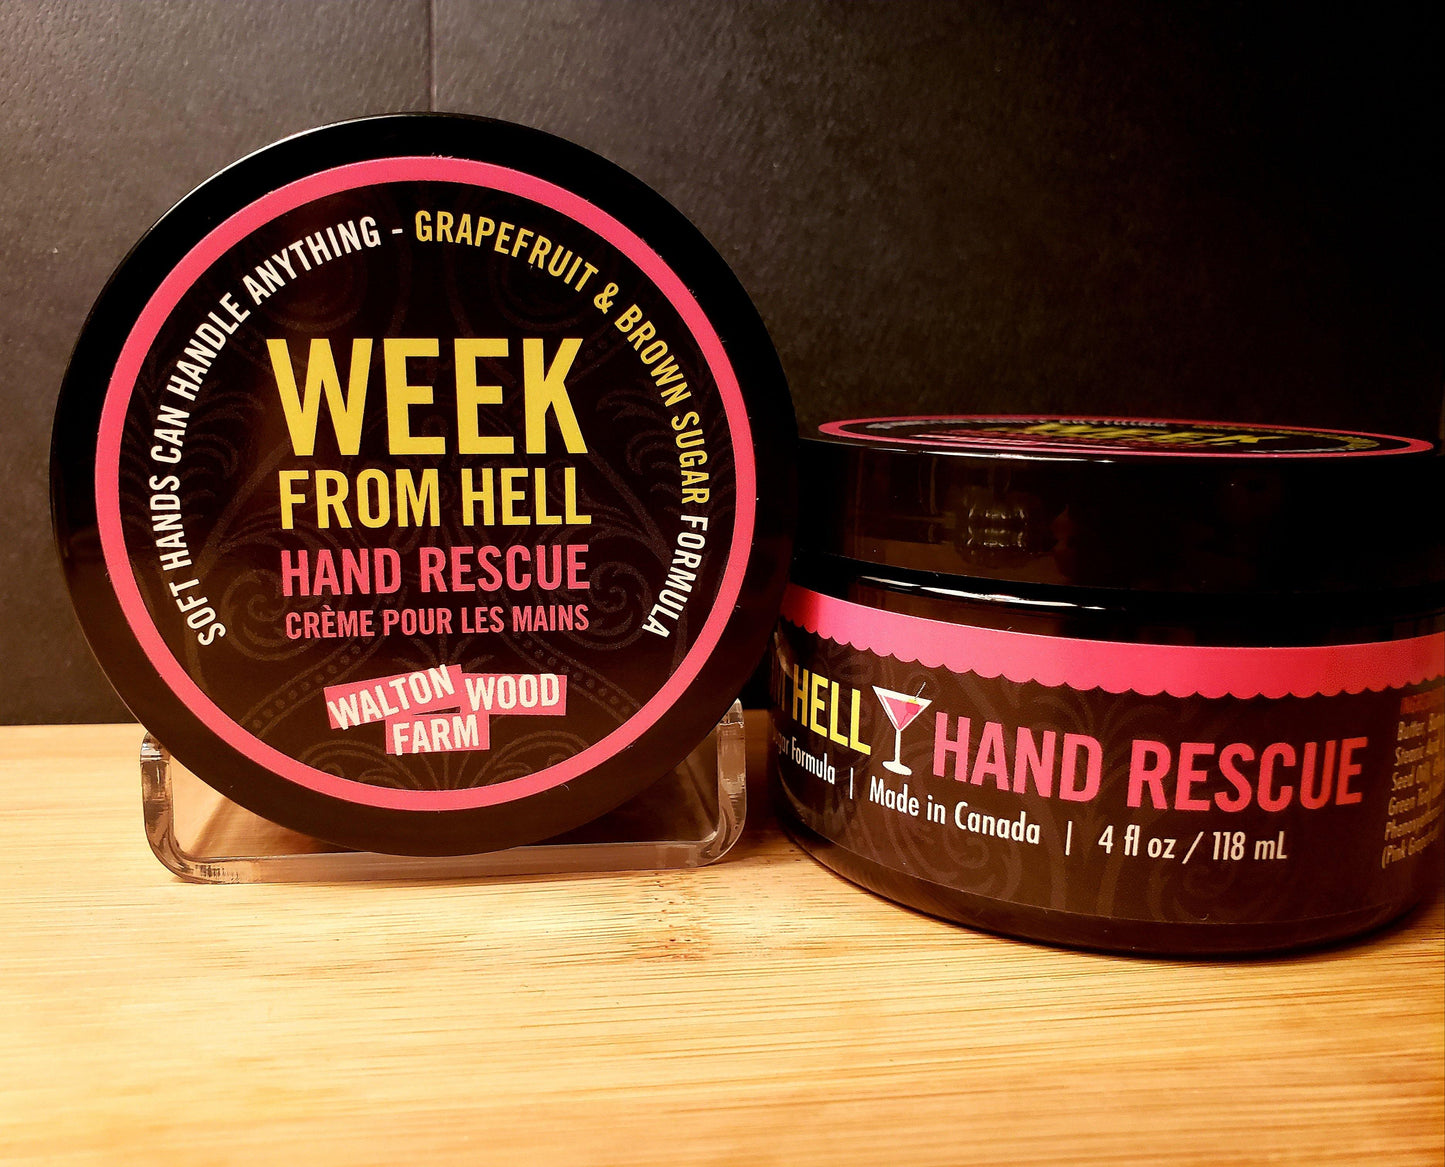 Week From Hell Hand Rescue - Grapefruit & Brown Sugar - The Wandering Merchant